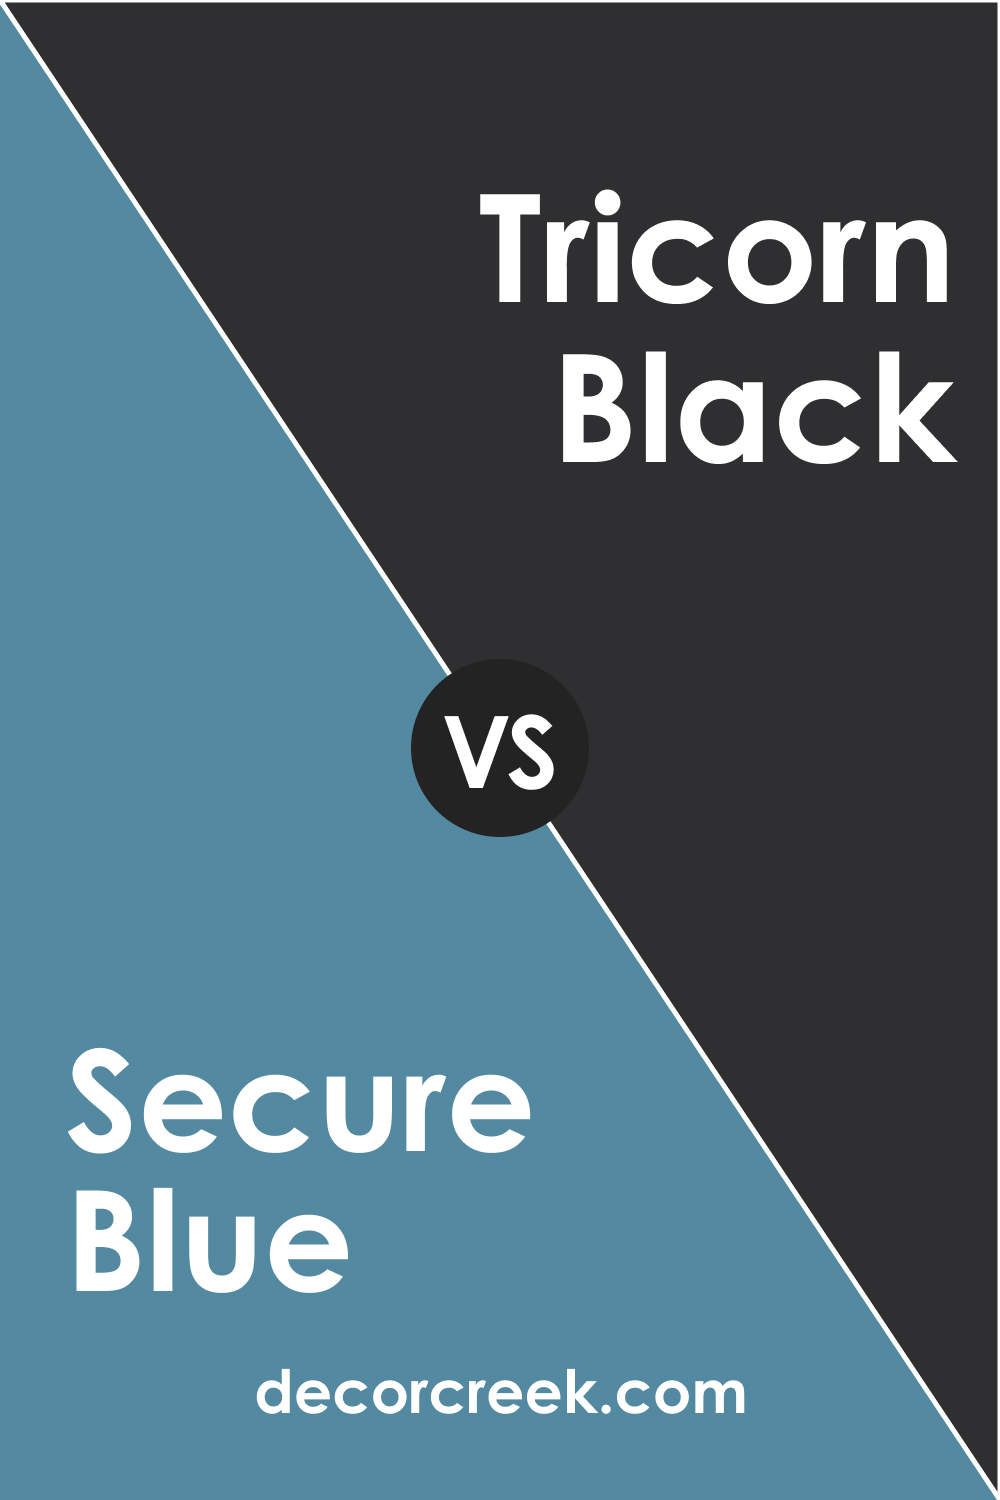 Secure Blue SW 6508 and SW 6258 Tricorn Black